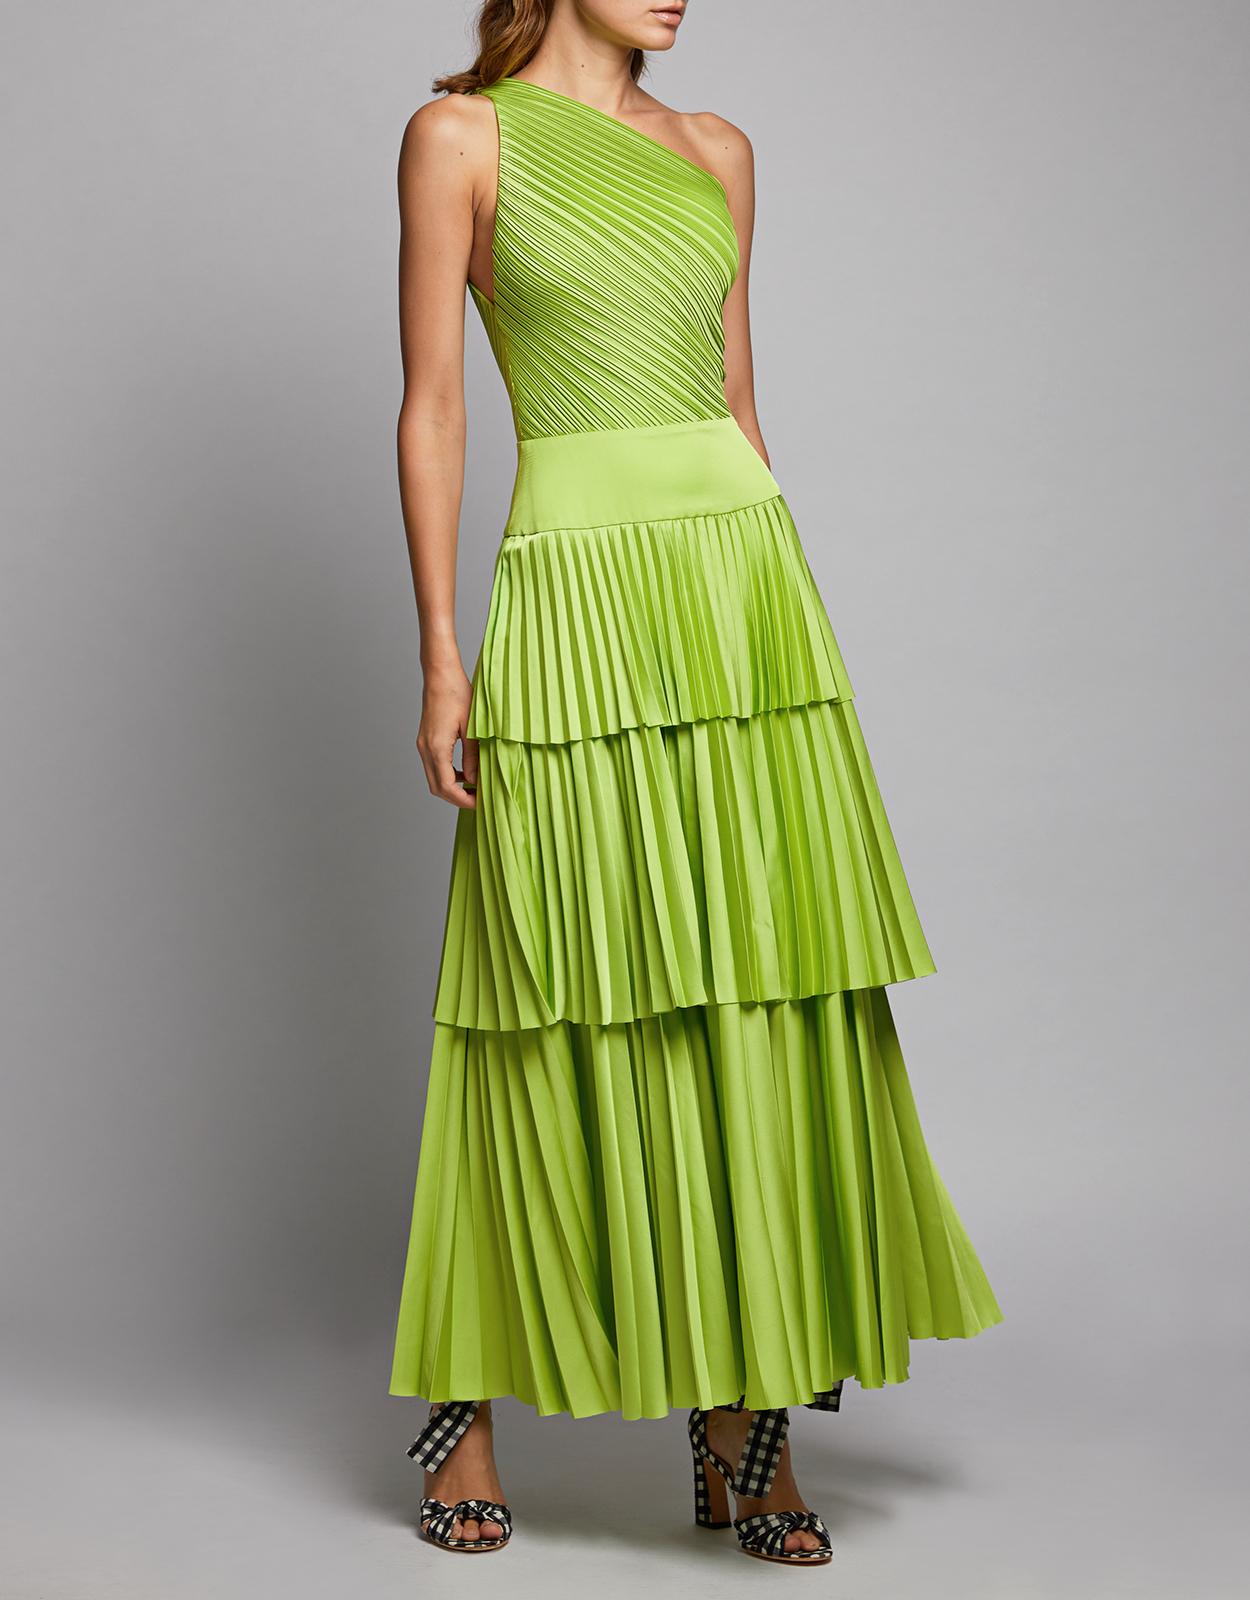 Solace London Satin Larrisa One-shoulder Pleated Maxi Dress in Green - Lyst